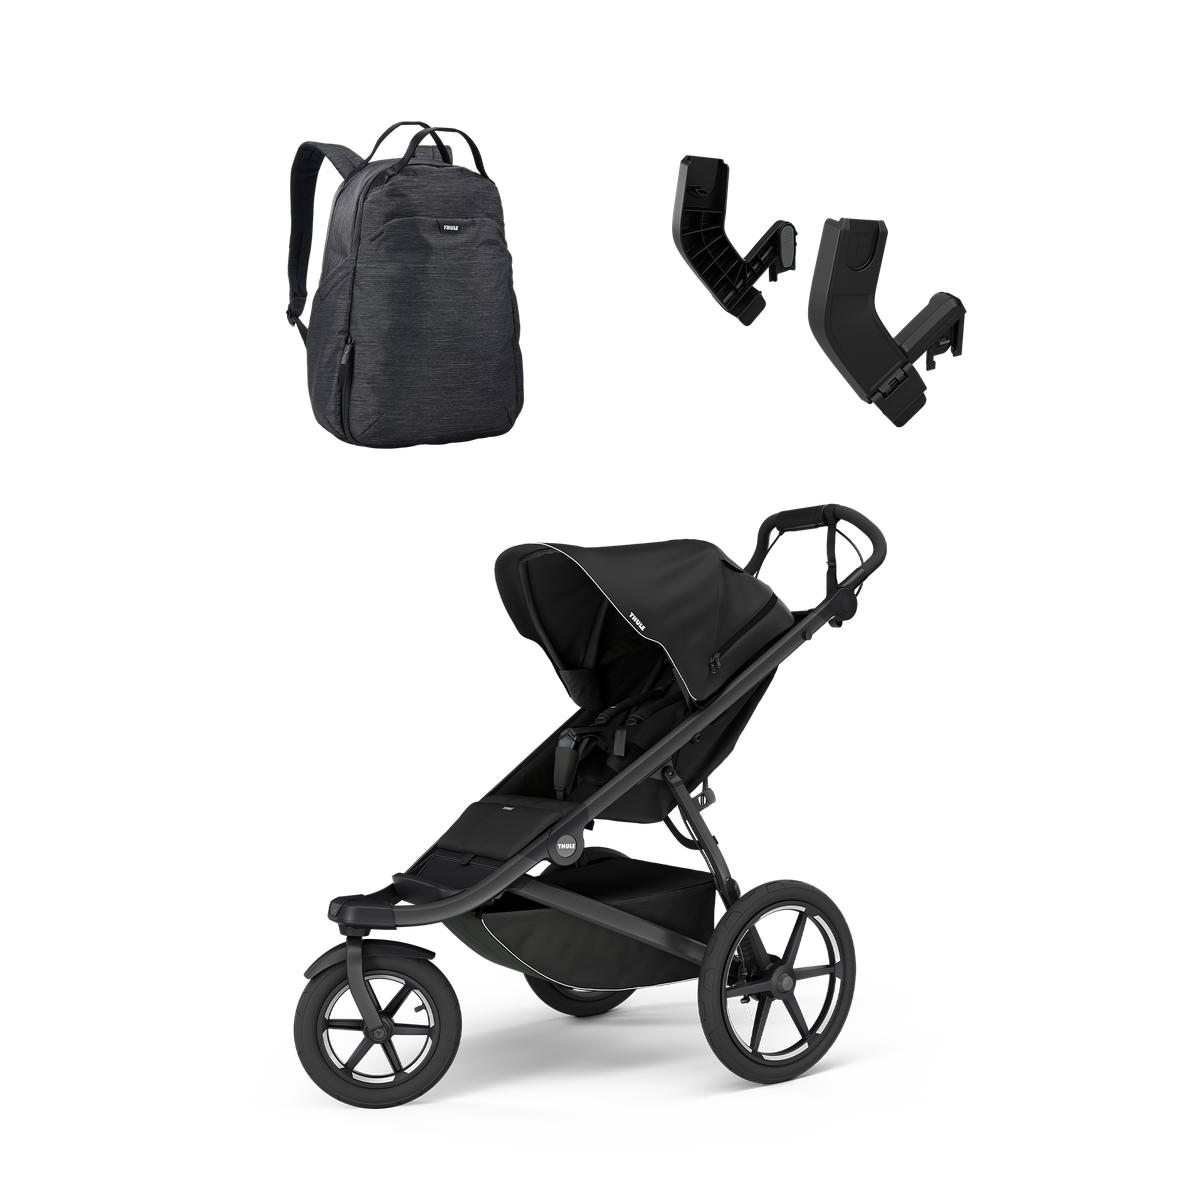 Thule Urban Glide 3 + Thule changing backpack + Thule urban glide 3 car seat adapaters